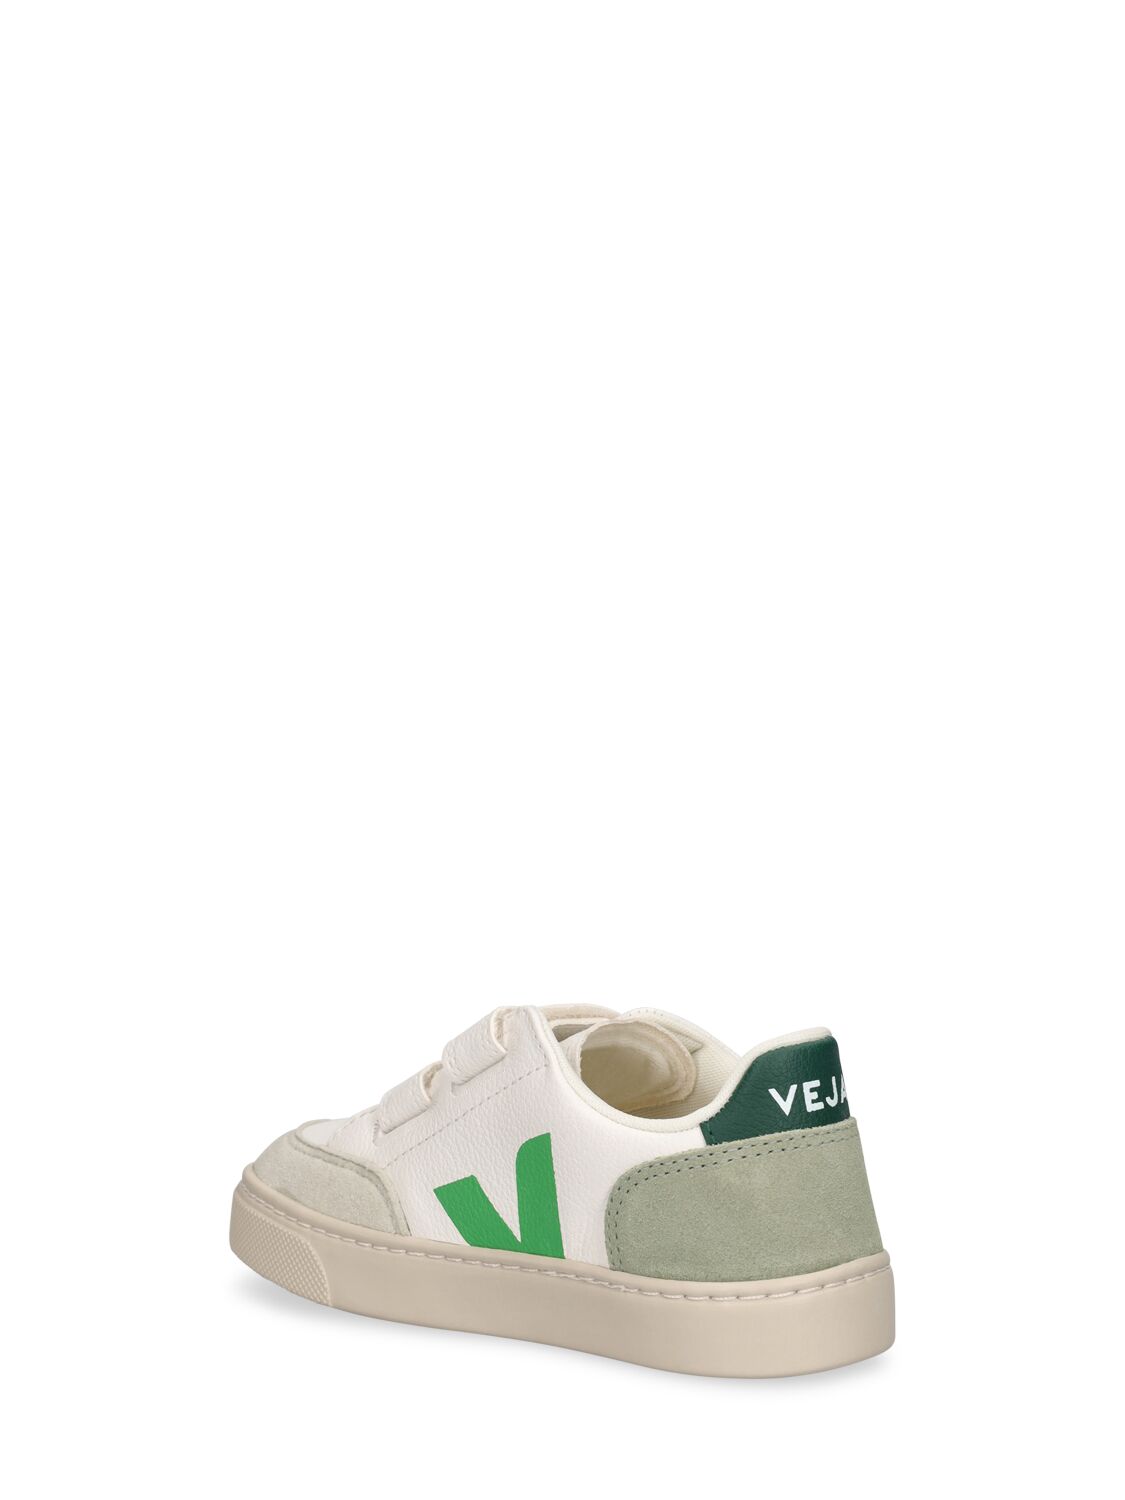 Shop Veja V-12 Chrome-free Leather Sneakers In White,green